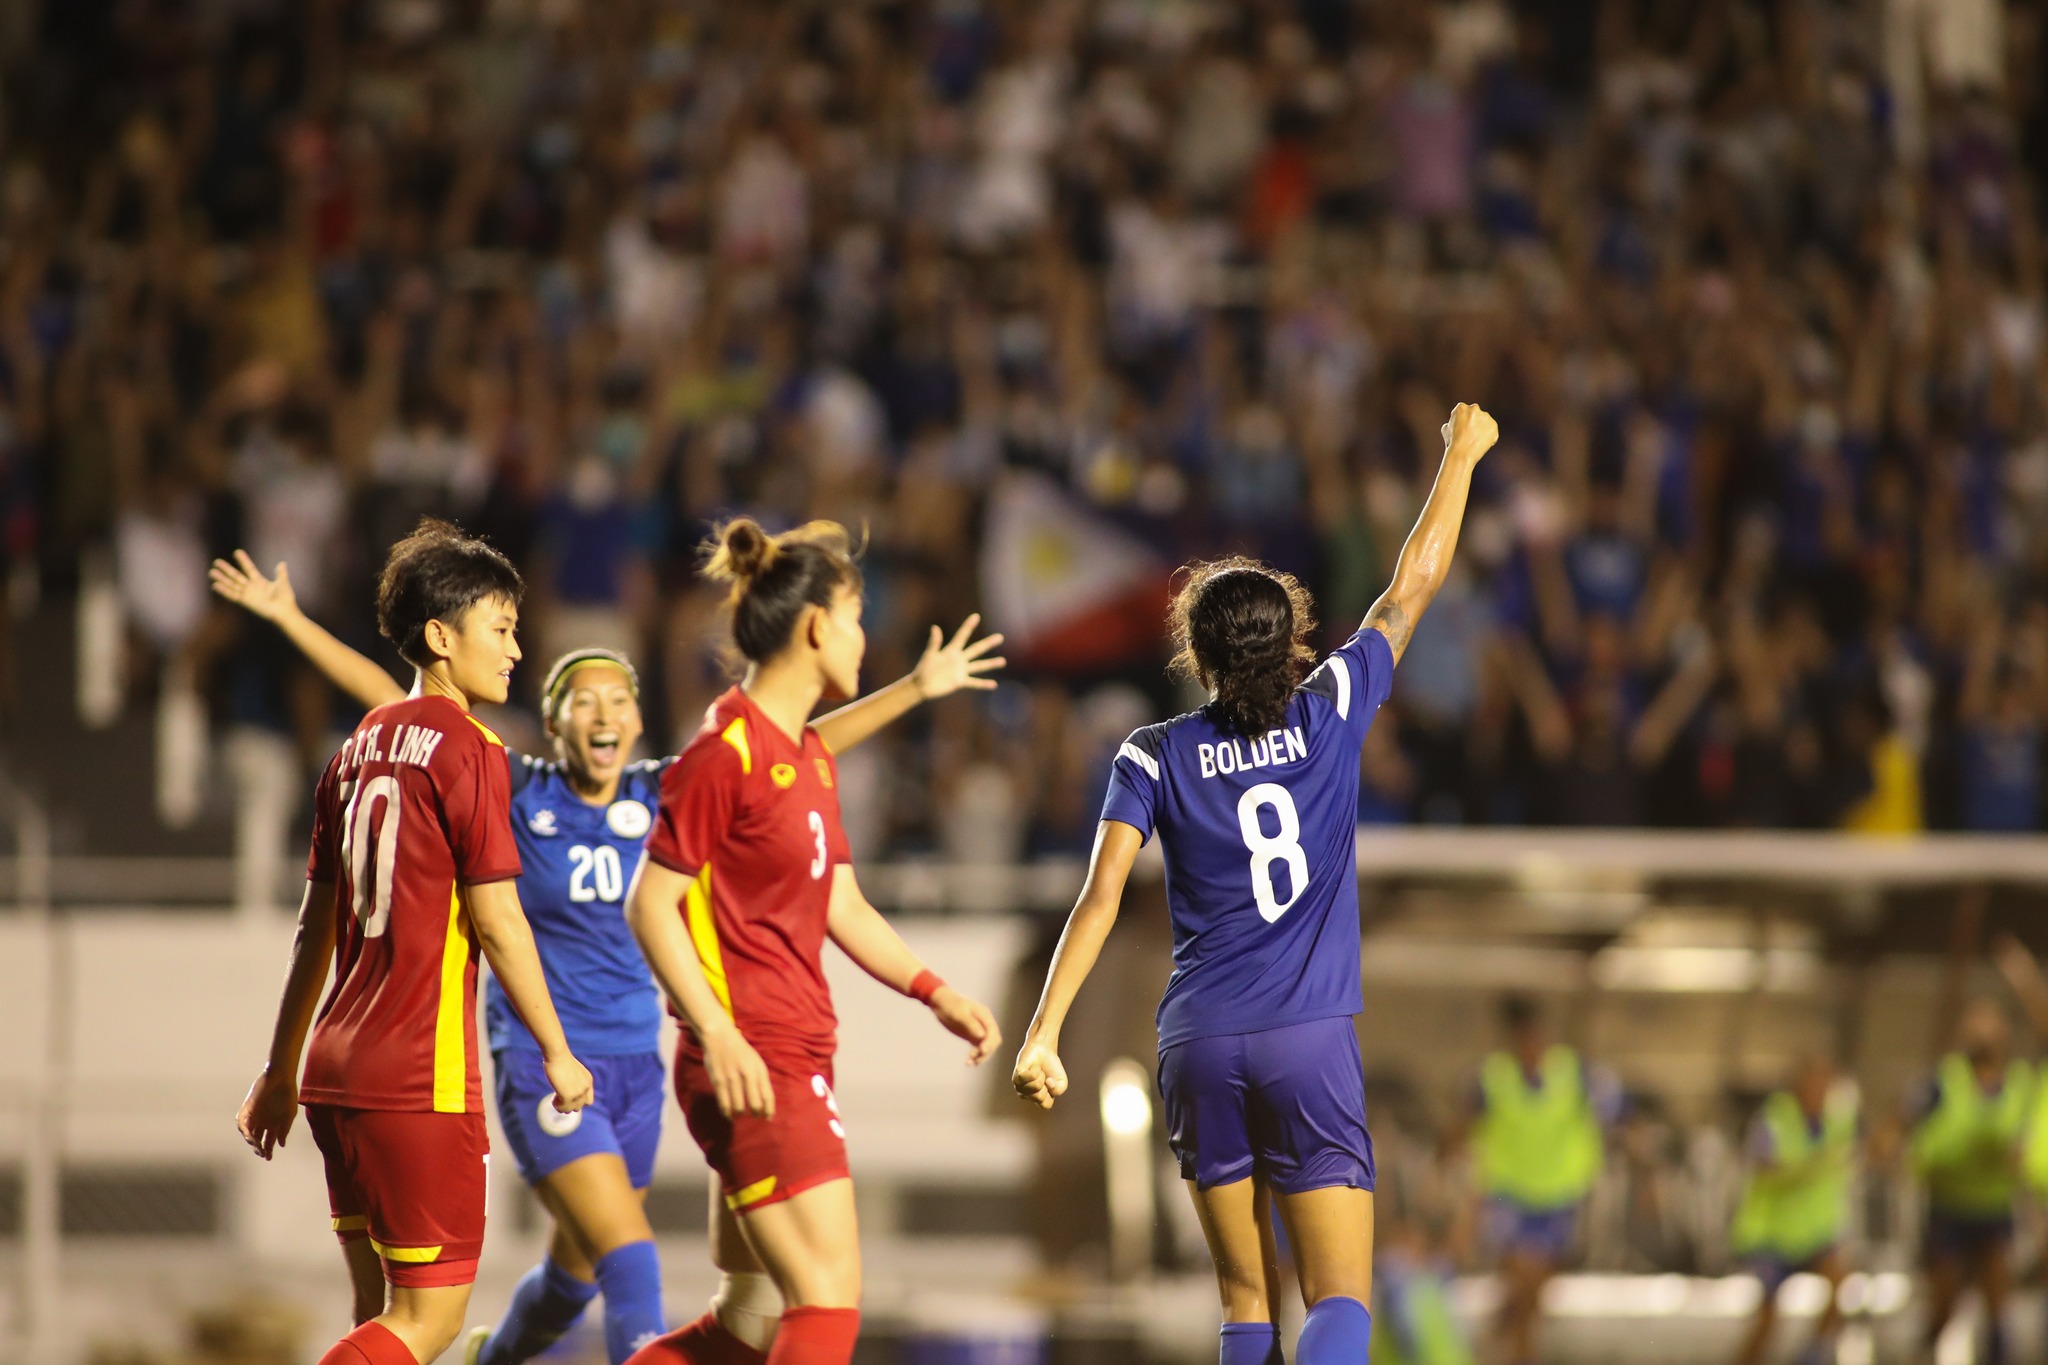 Sarina Bolden celebrating with the crowd of Filipino fans